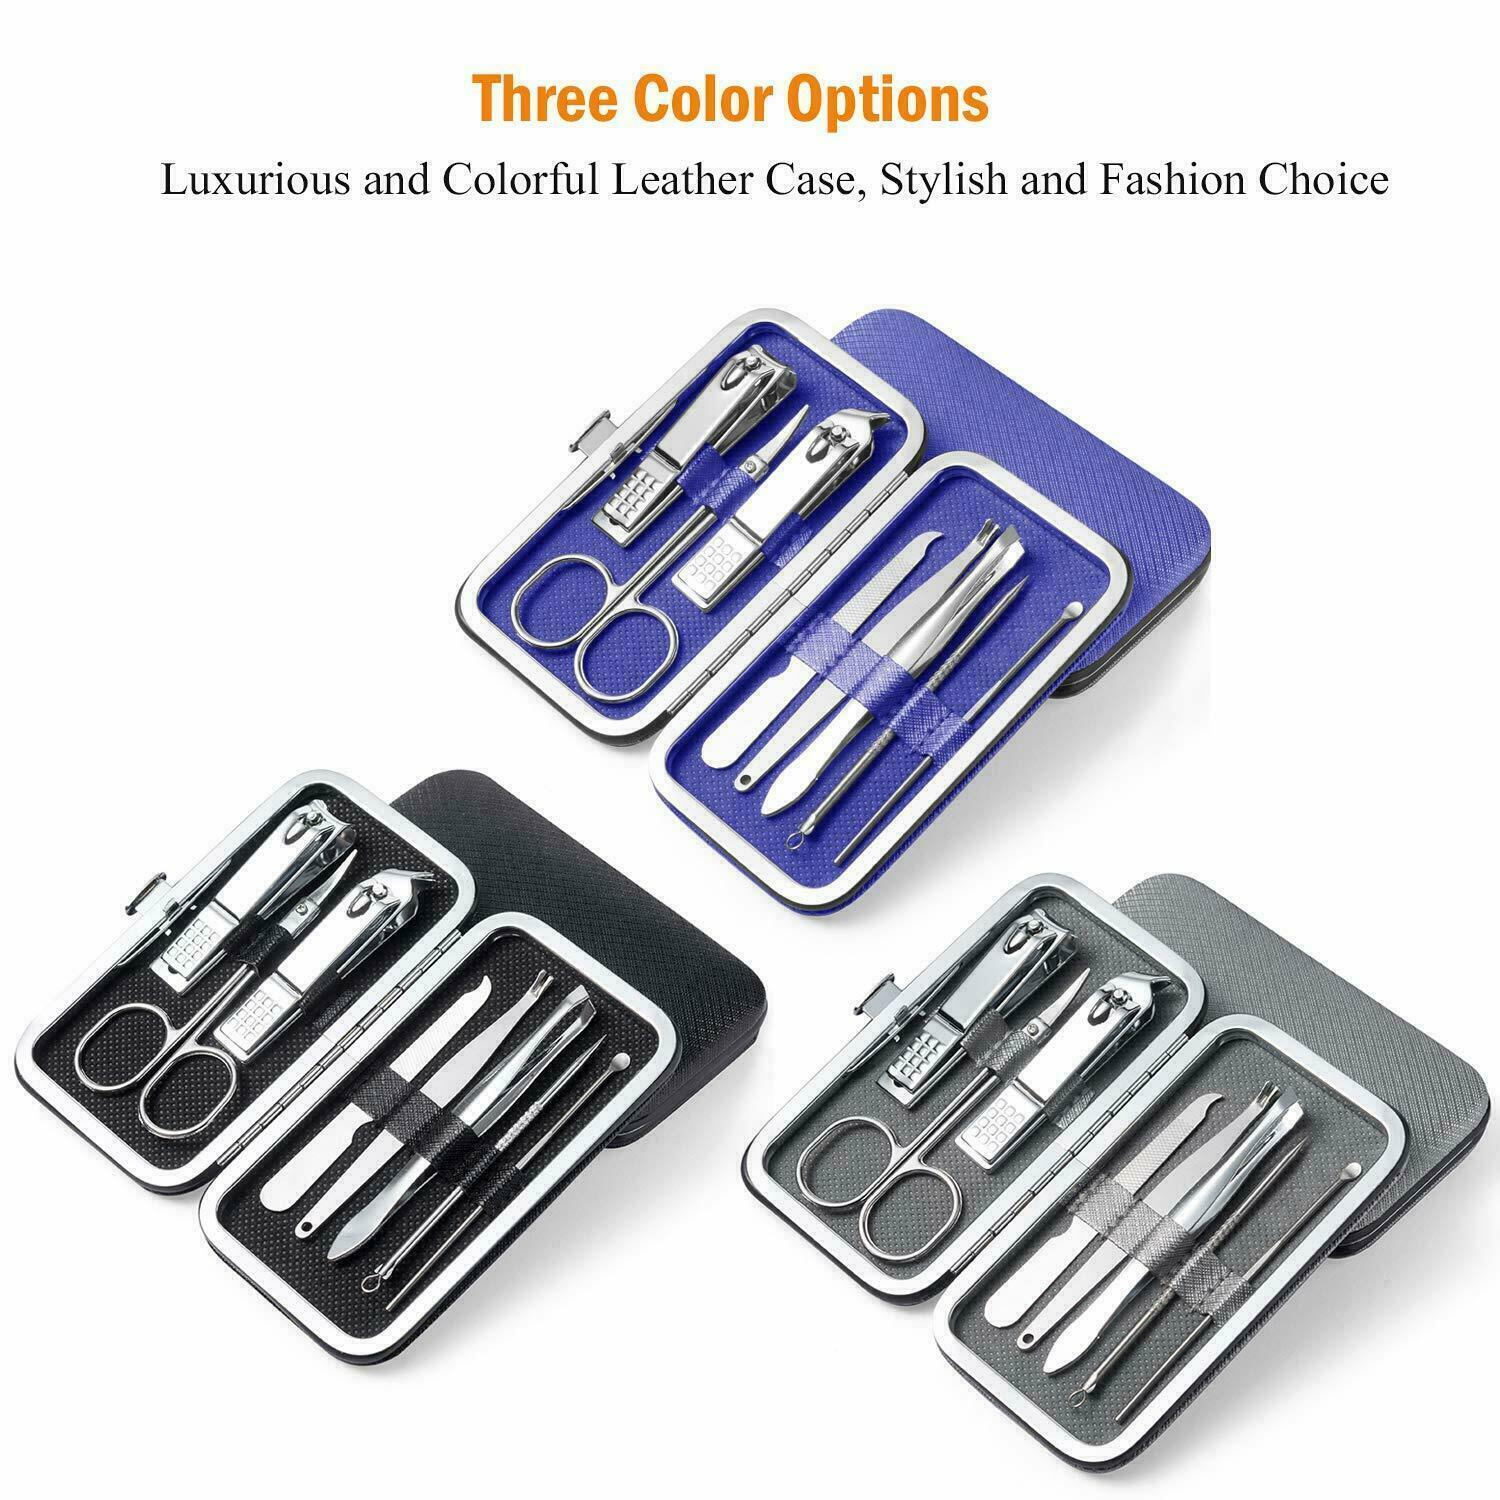 Professional Nail Care Tools Manicure Pedicure Set Nail Clippers Black Case only